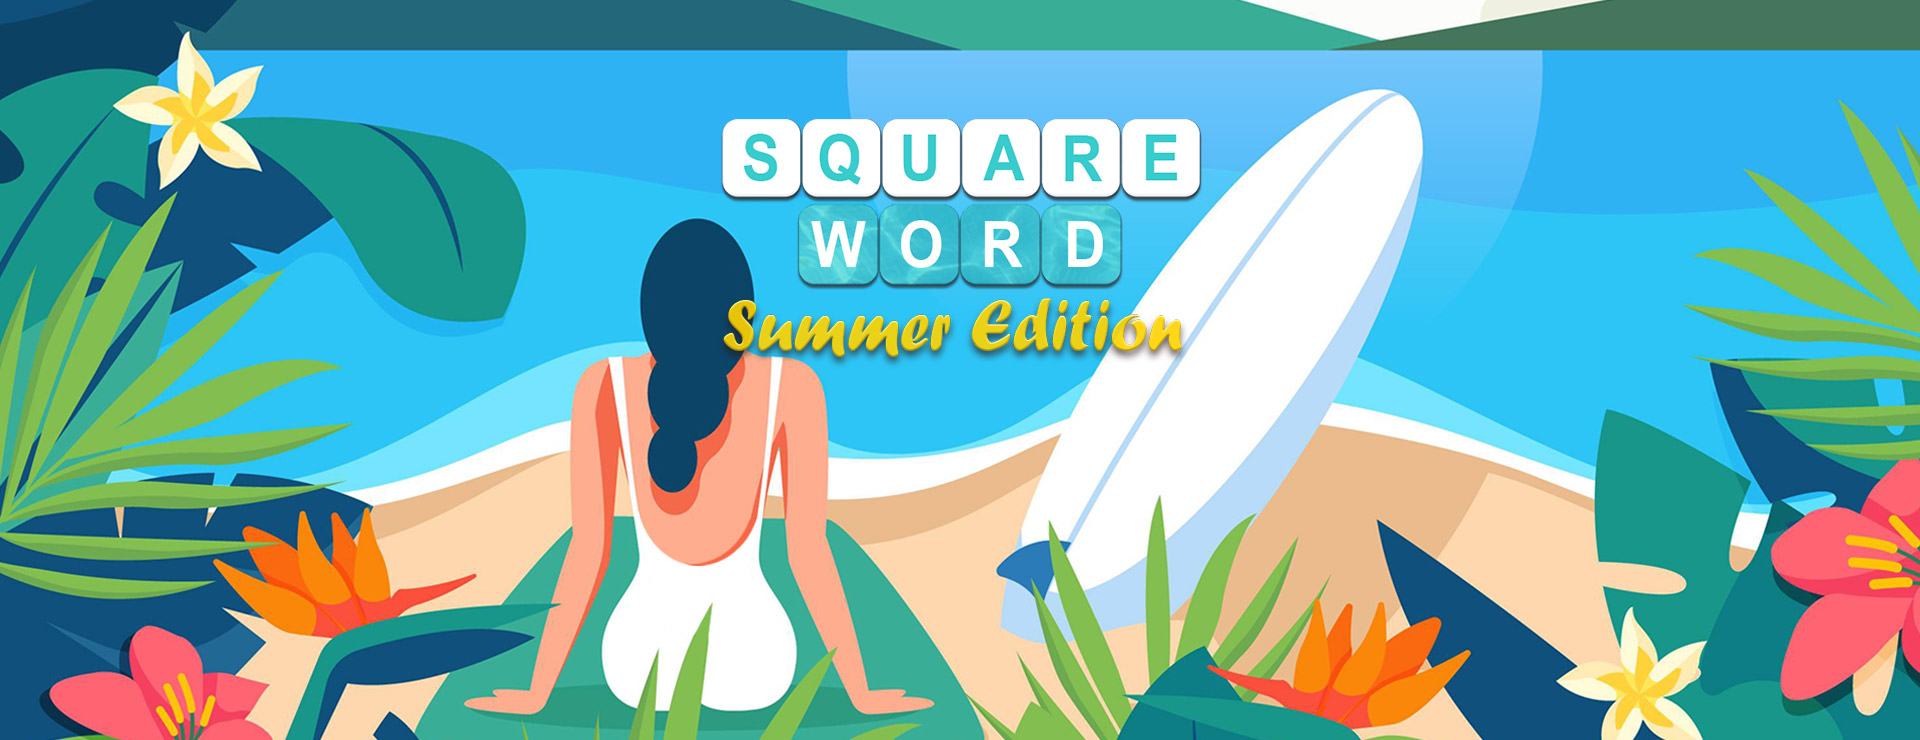 Square World: Summer Edition - Puzzle Game